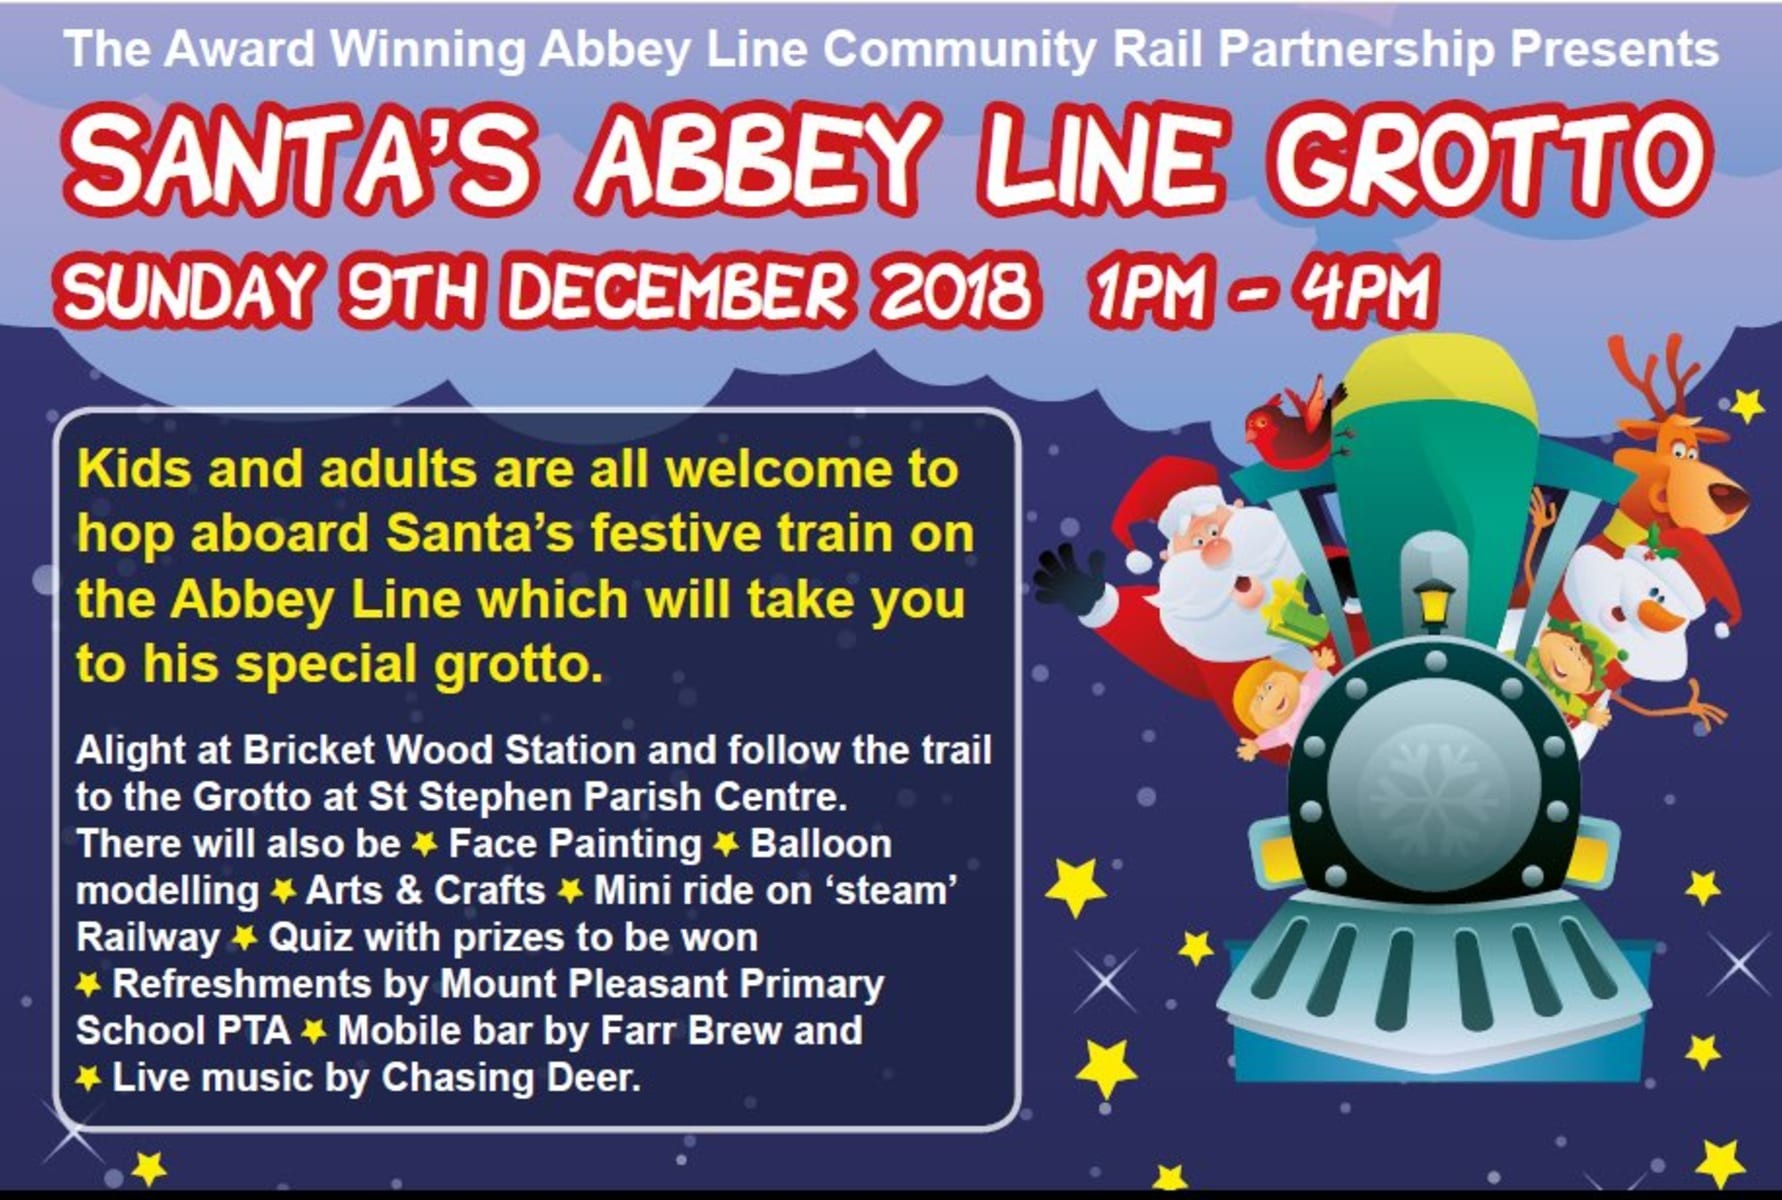 Families invited to join Santa’s festive train on the Abbey Line this Christmas